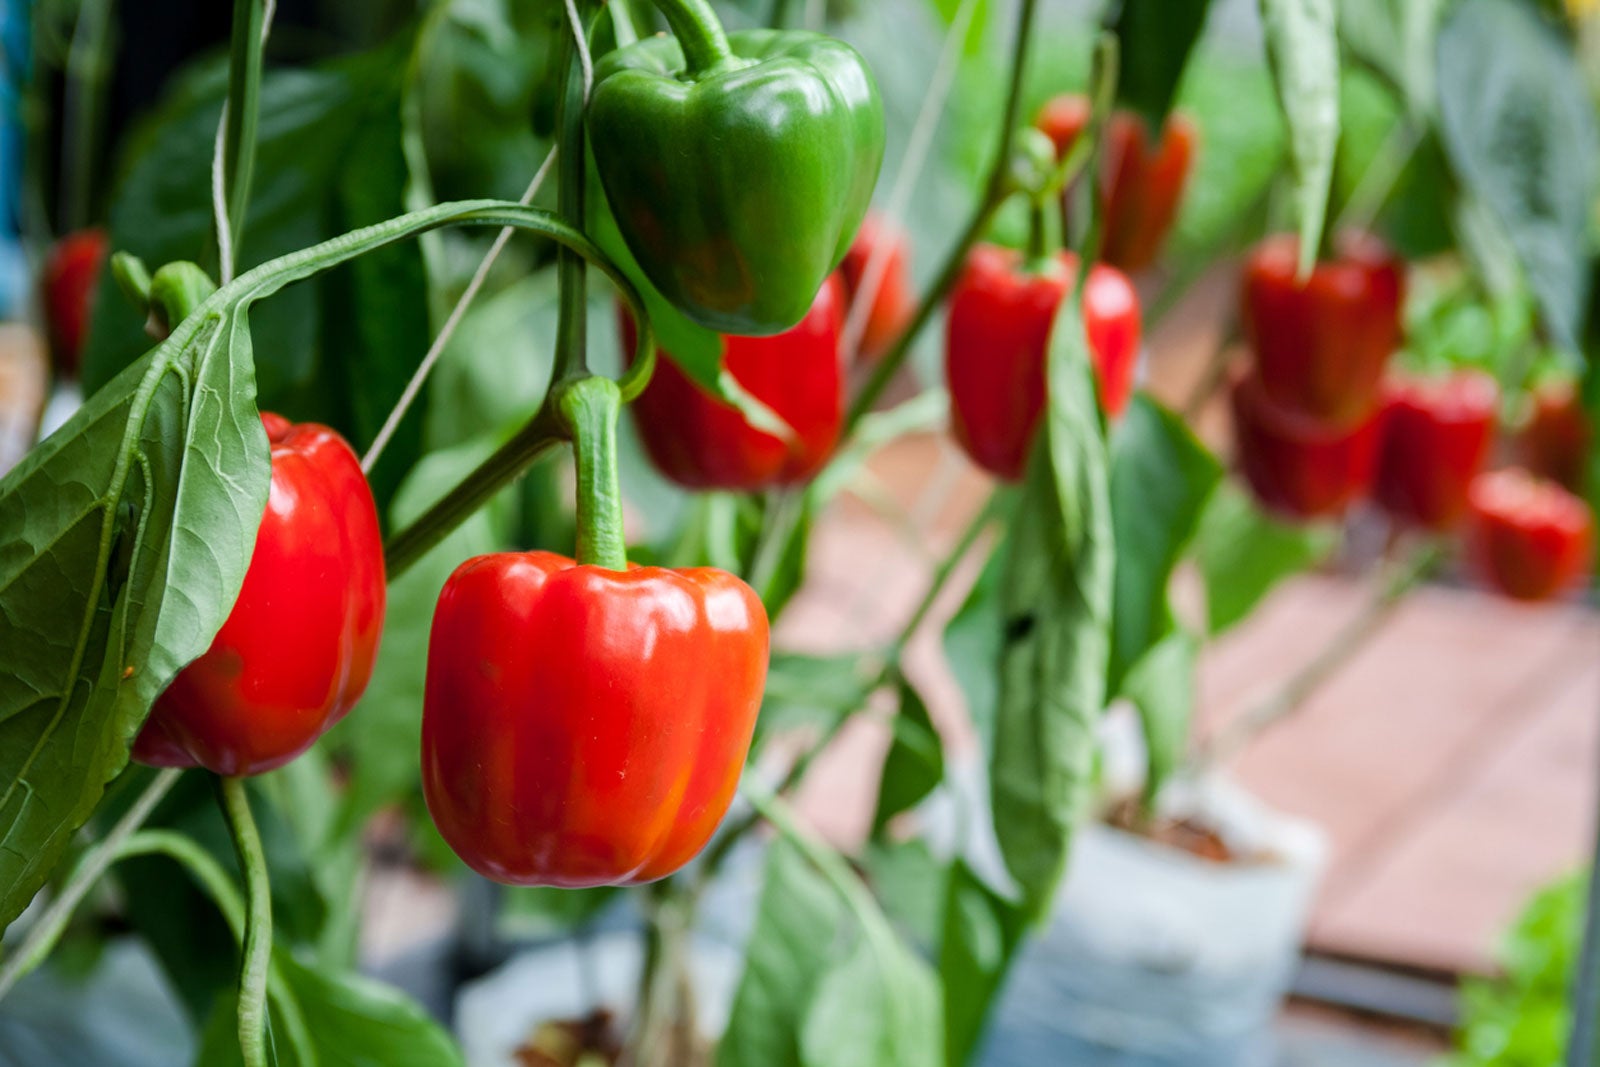 How to Grow Green Bell Peppers